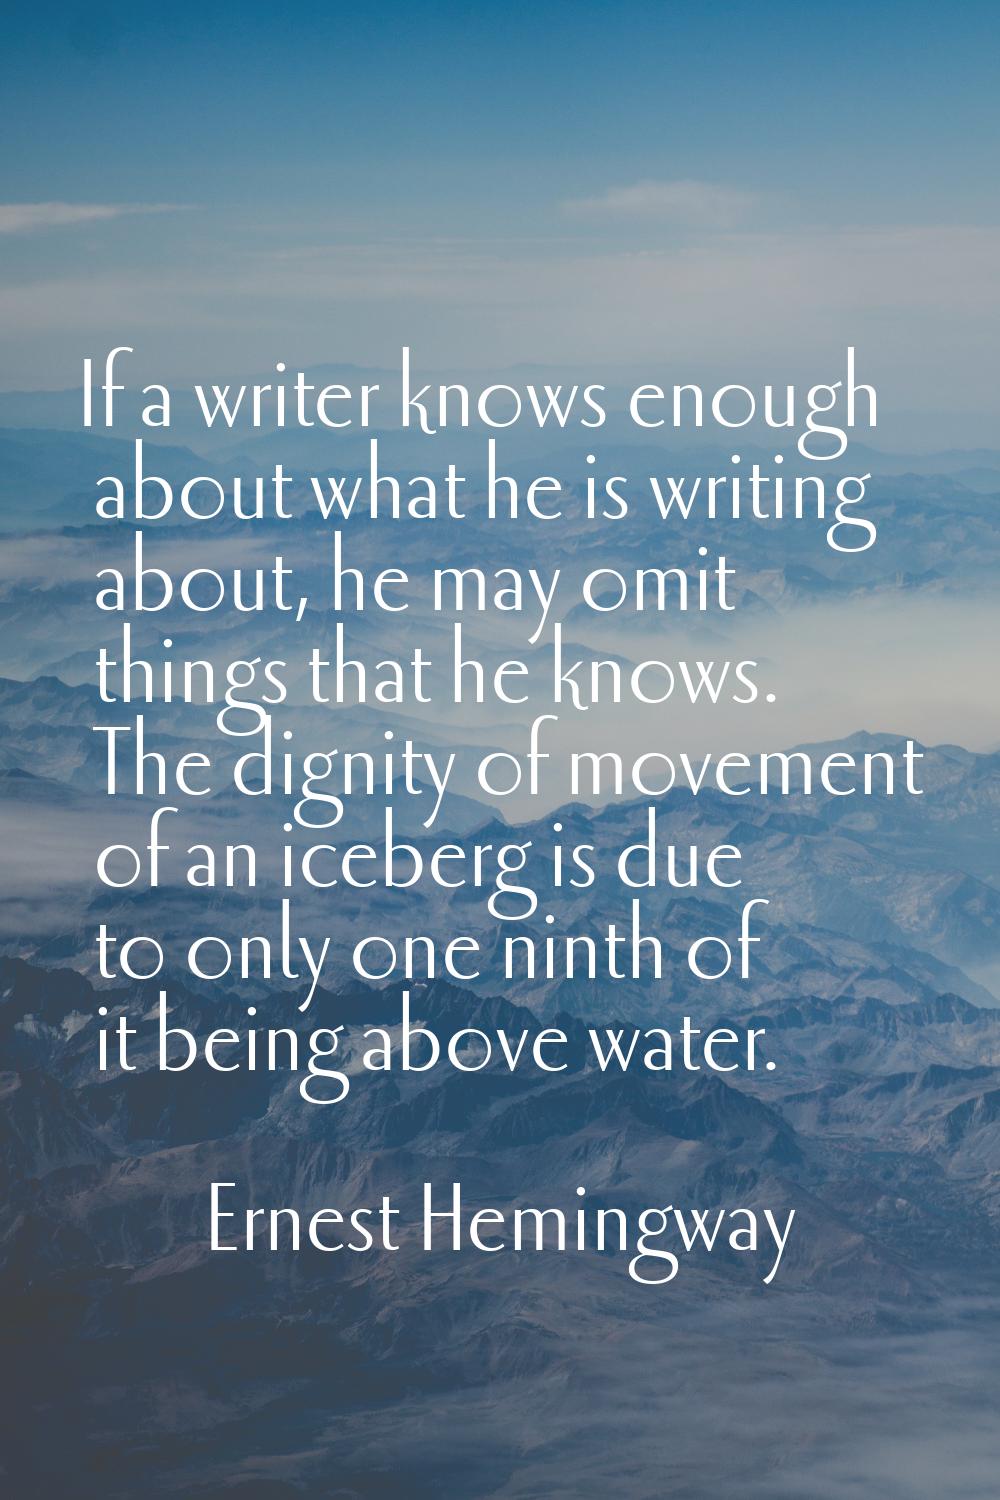 If a writer knows enough about what he is writing about, he may omit things that he knows. The dign